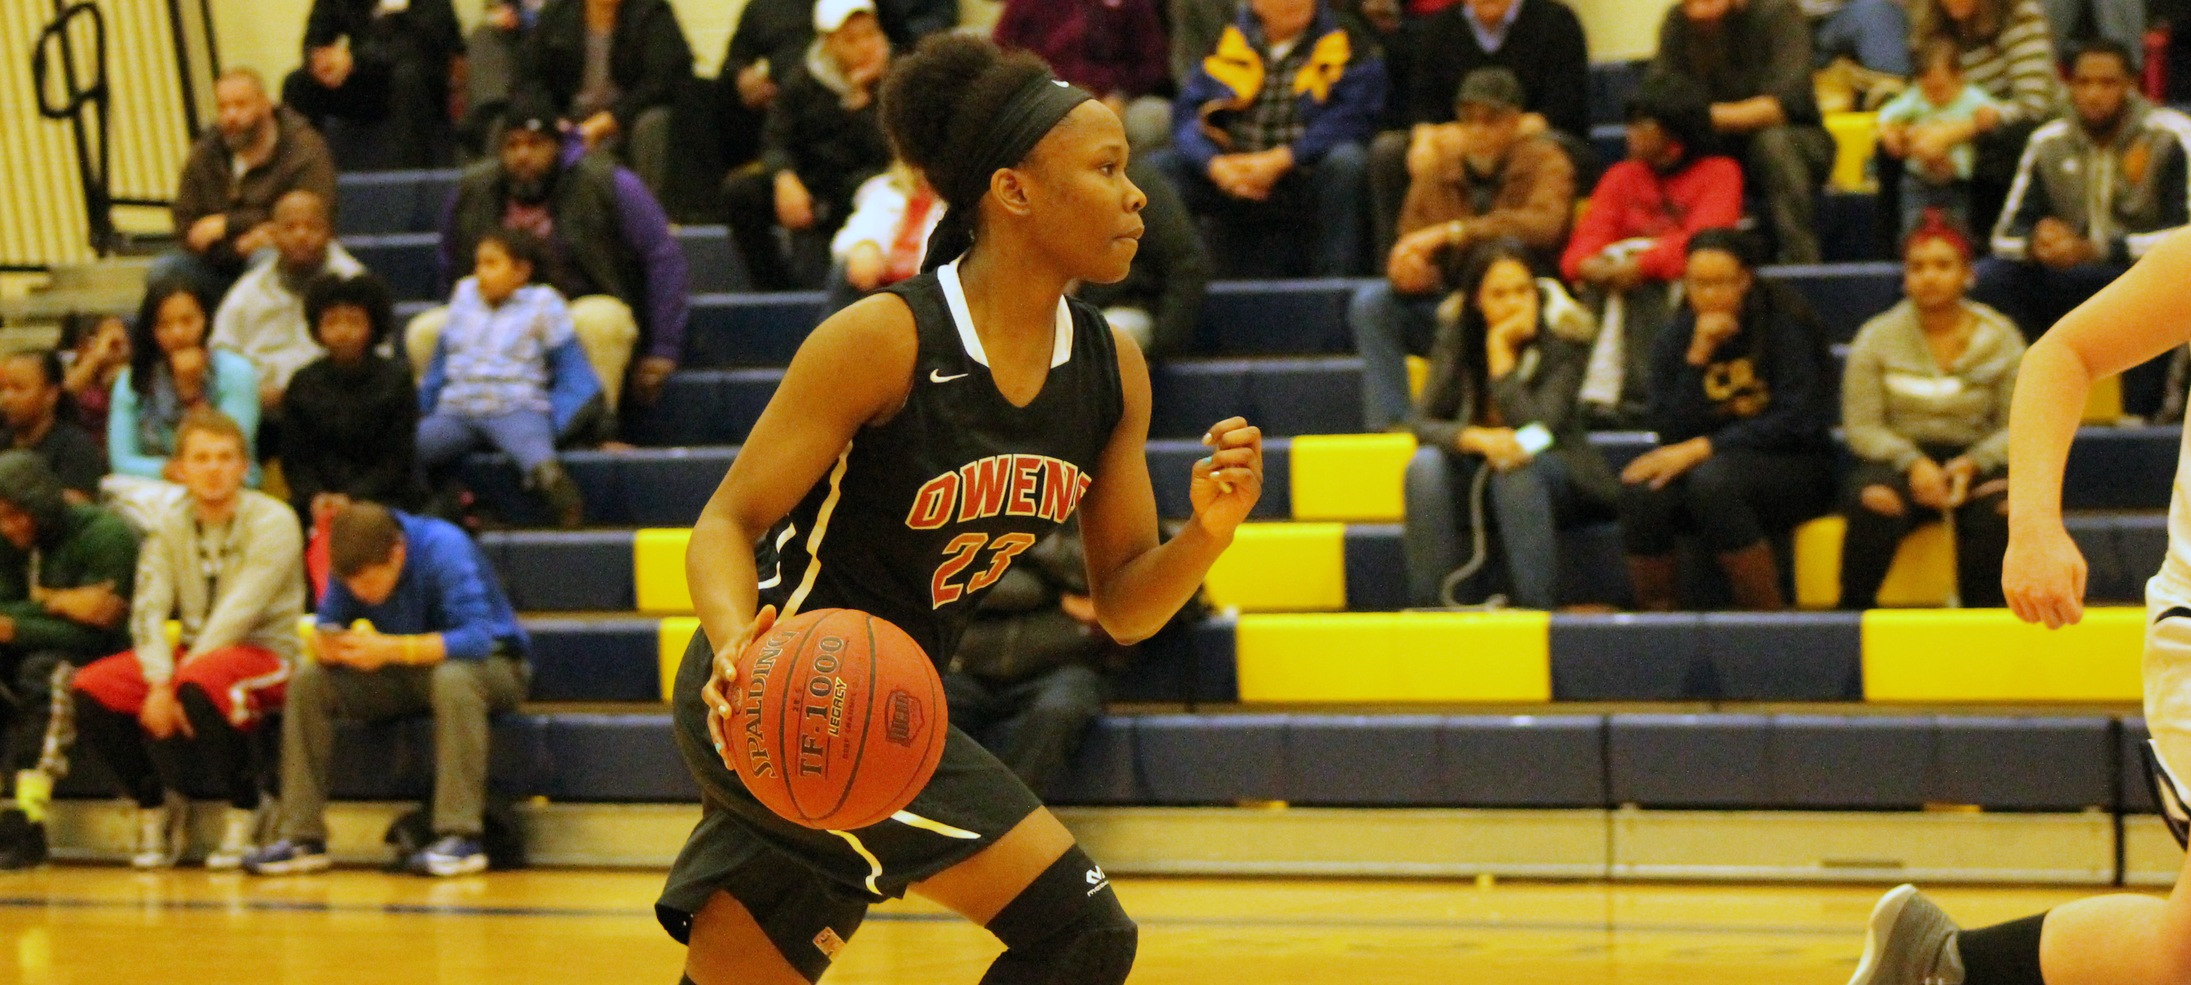 Denissa Sly brings the ball up the court against Lorain County. Photo by Nicholas Huenefeld/Owens Sports Information